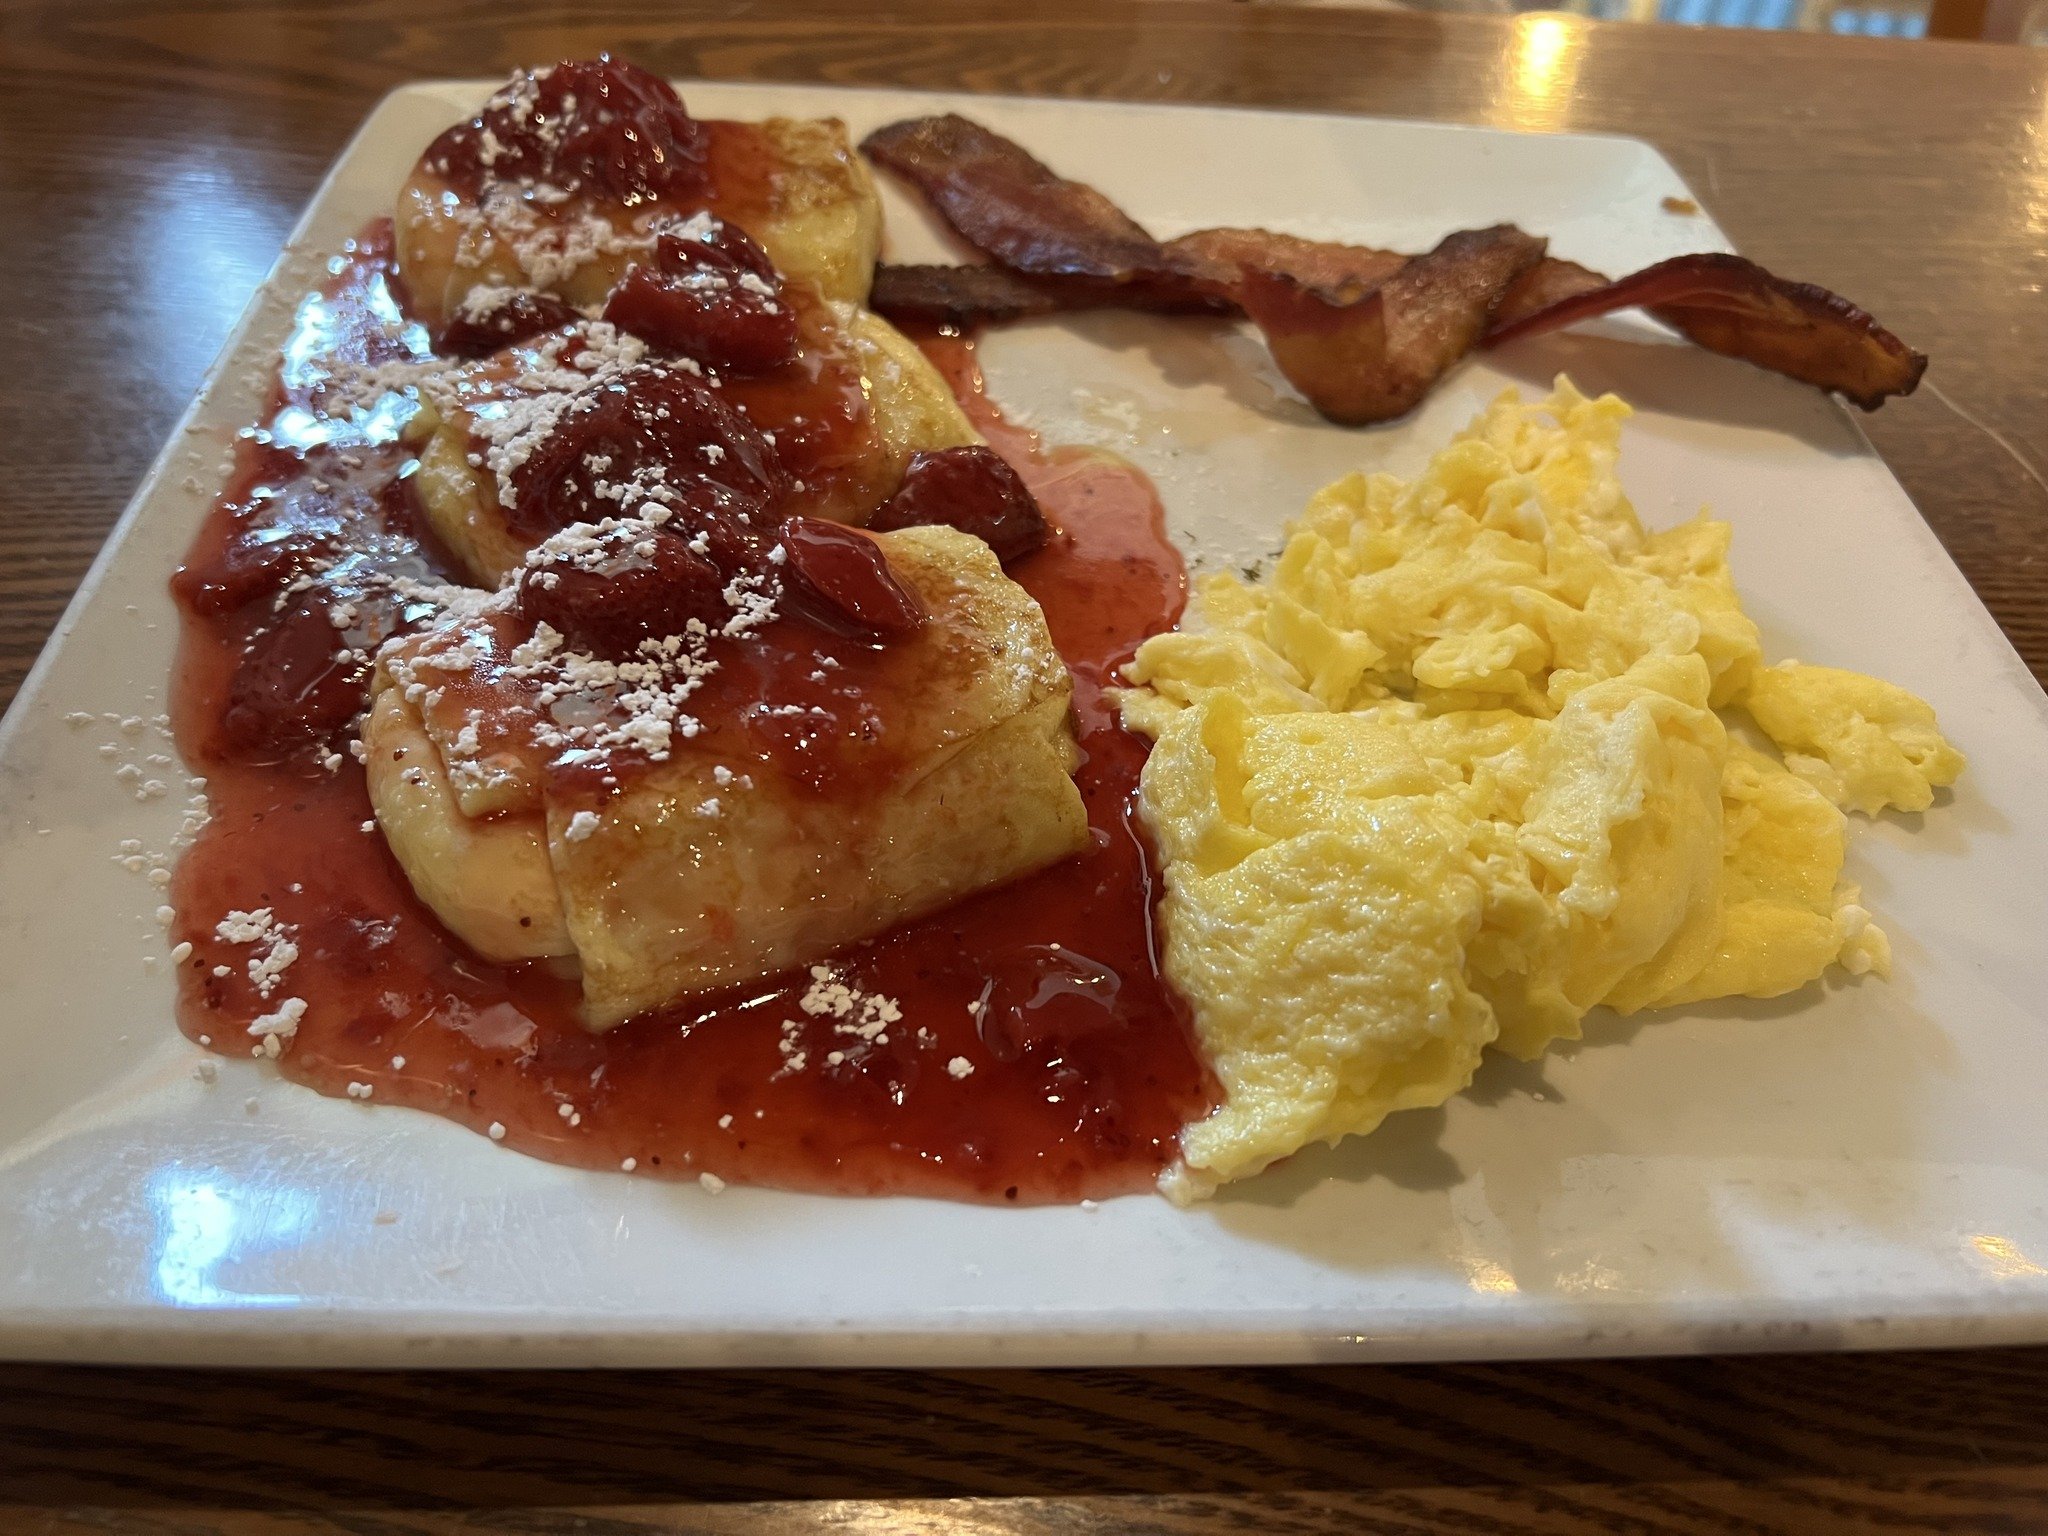 🍓 Indulge in the sweet elegance of our Strawberry Crepes - three creamy cheese blintzes topped with strawberry sauce and a dusting of powdered sugar. Served with a side of eggs and bacon for the perfect blend of sweet and savory. 

Satisfy your brea